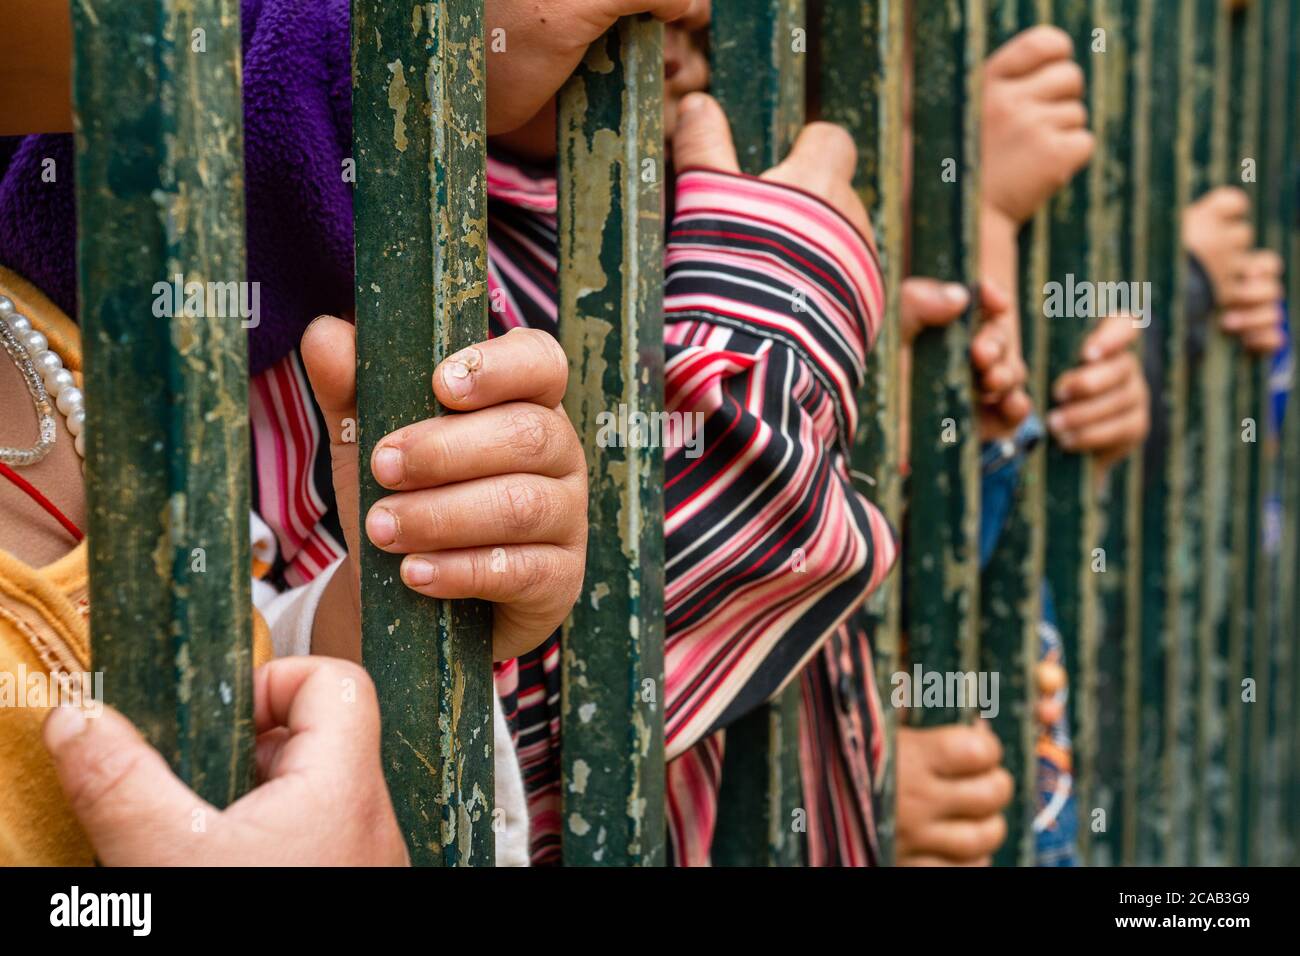 A group of children's sore hands grab on to metal bars. child exploitation, immigration, abuse, human trafficking, suffering concepts apply Stock Photo